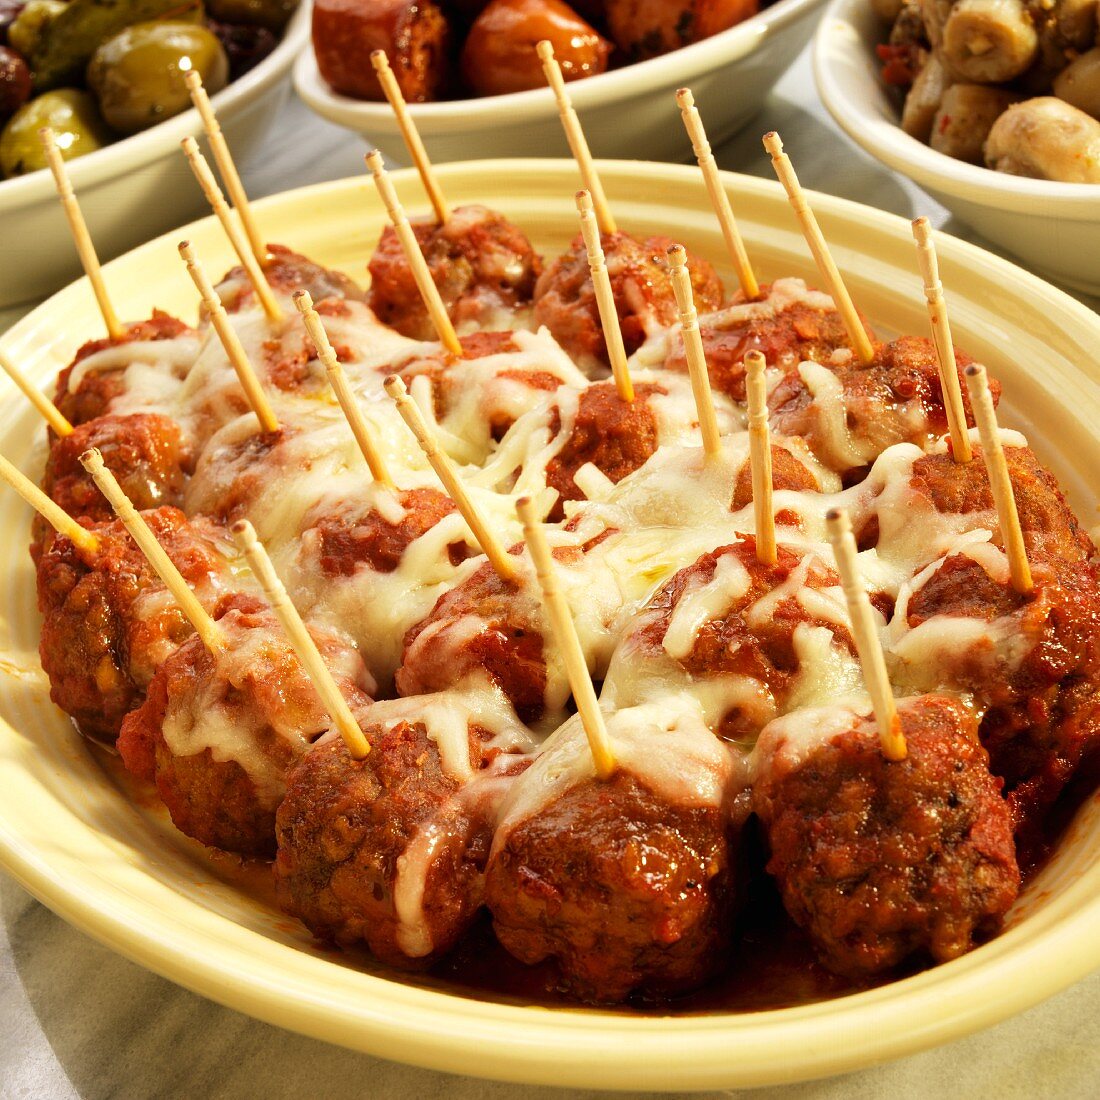 Meat balls in a spicy tomato sauce topped with melted cheese (Spain)